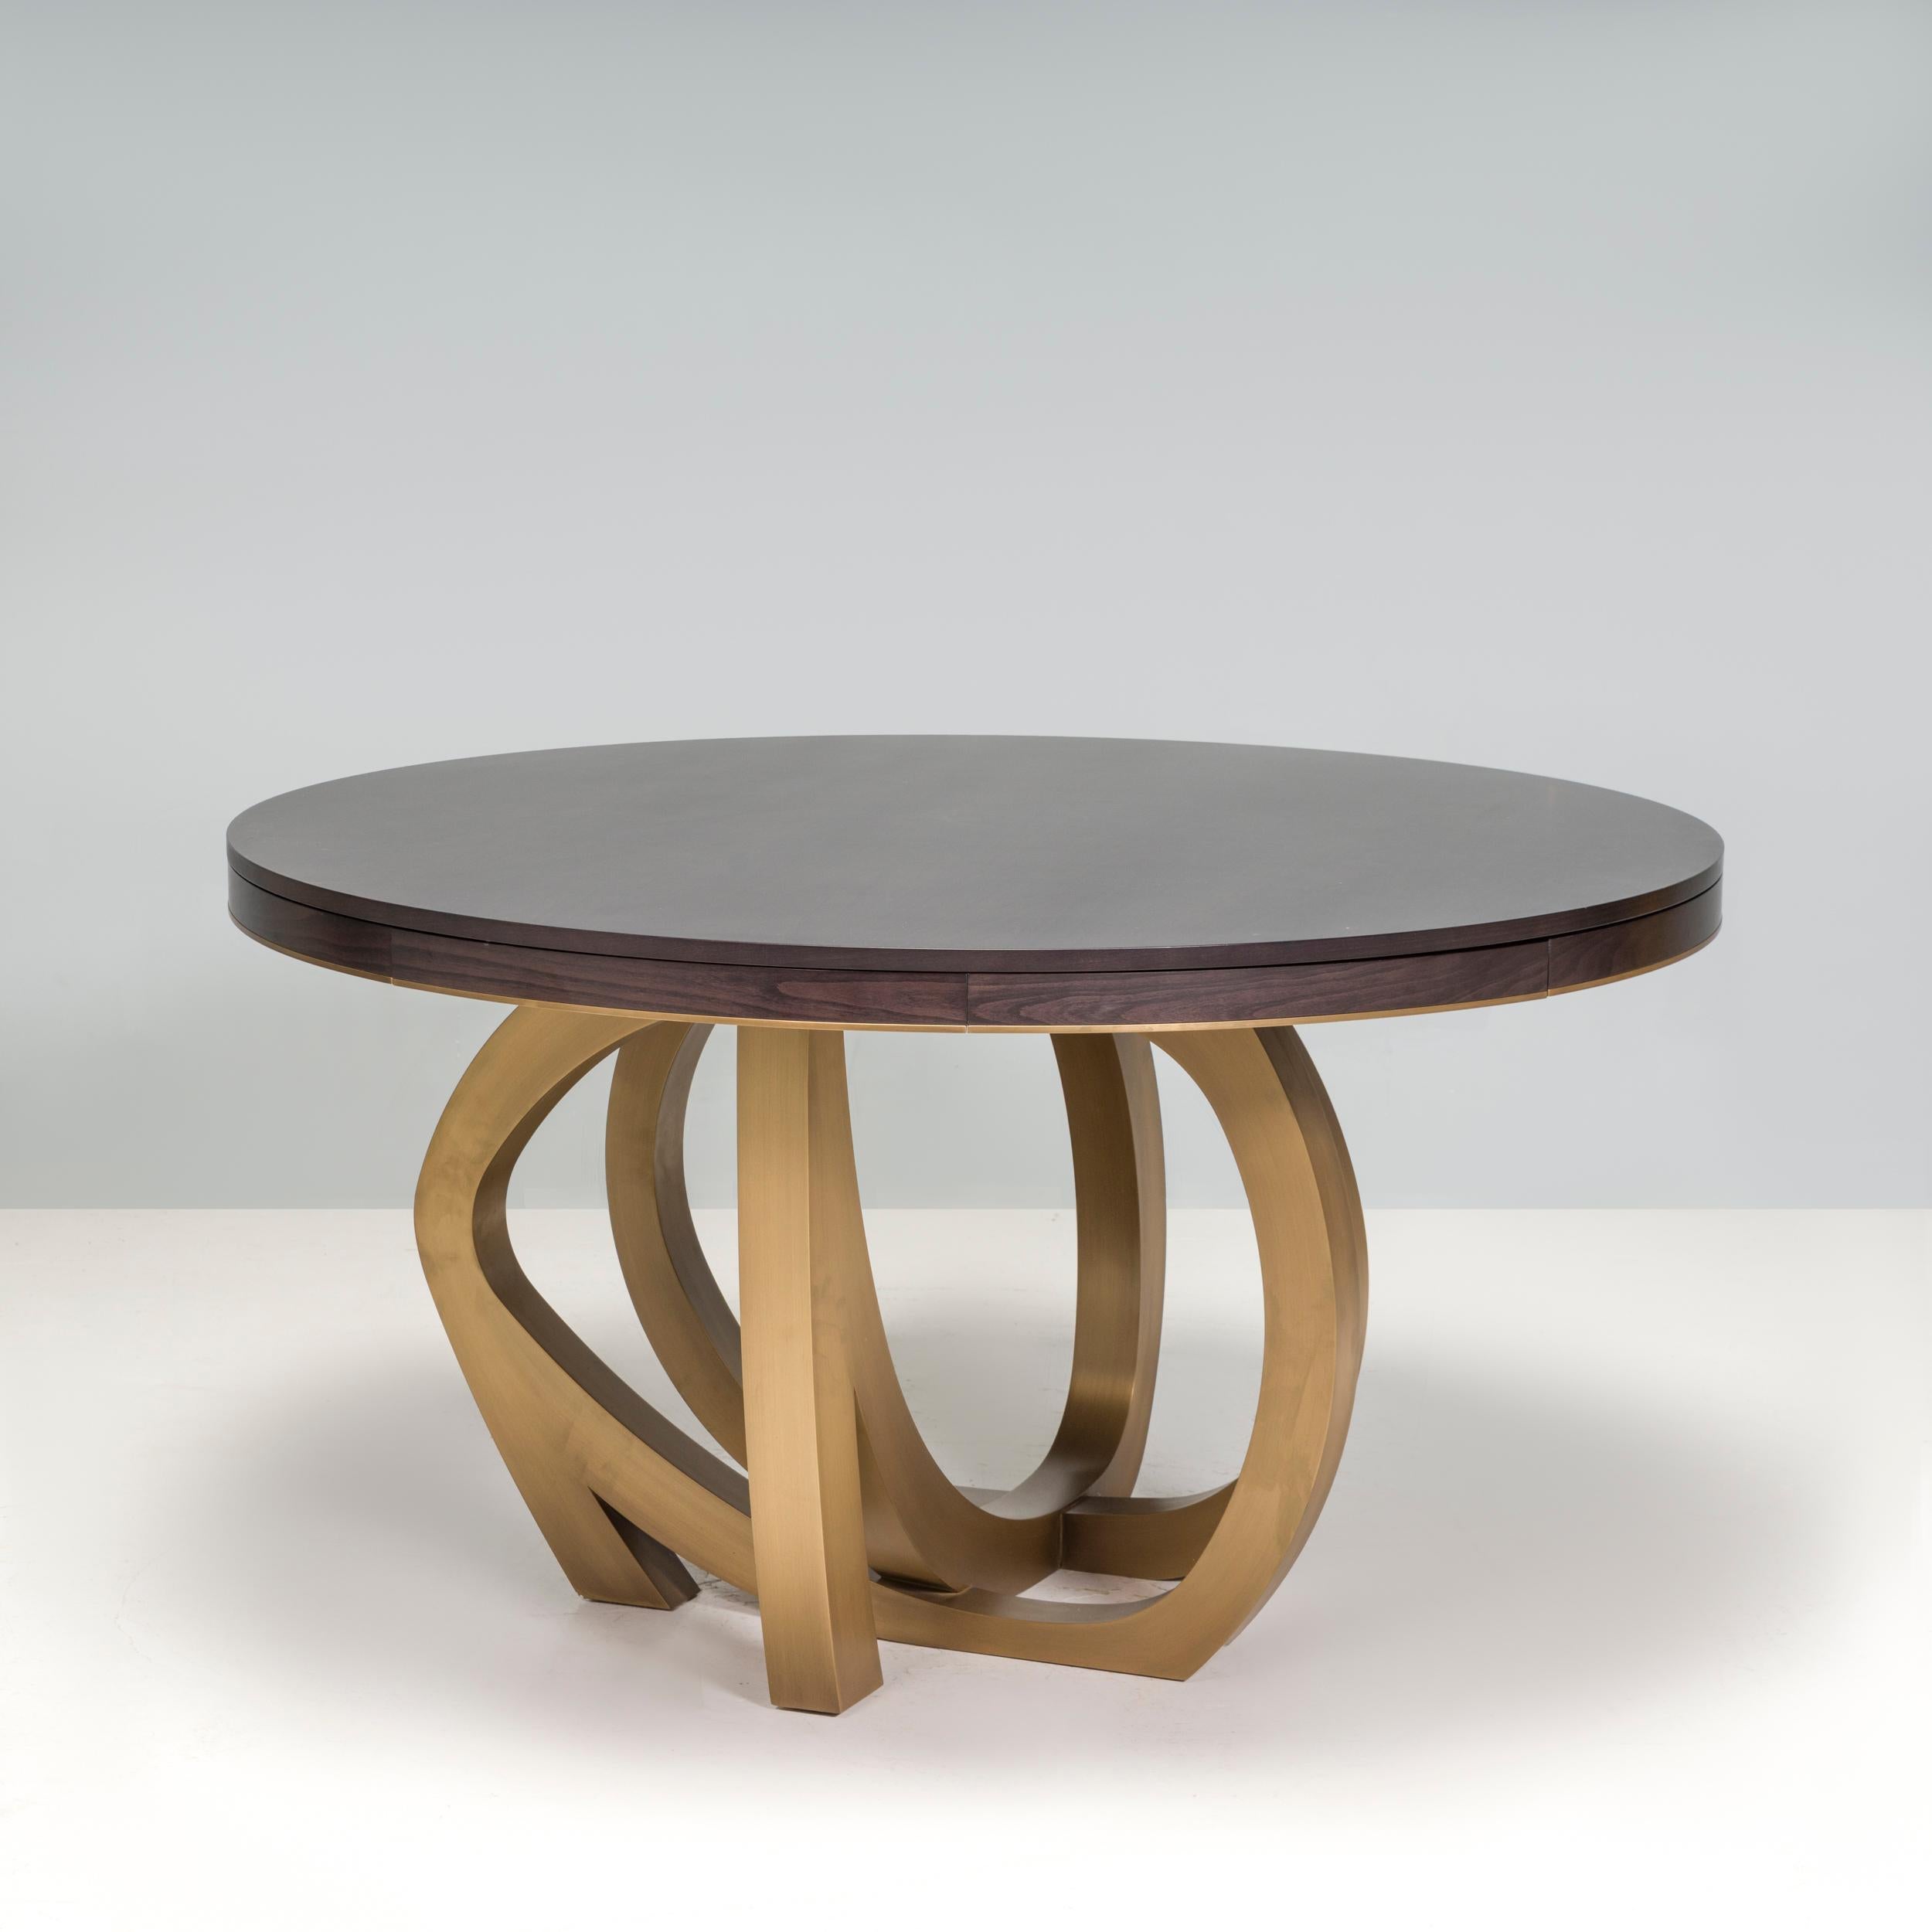 Baring Furniture from Oxfordshire, United Kingdom has been designing and making bespoke freestanding furniture. Creating outstanding, beautiful, useful and innovative pieces. 

The quilted maple round extending table is truly a statement piece with